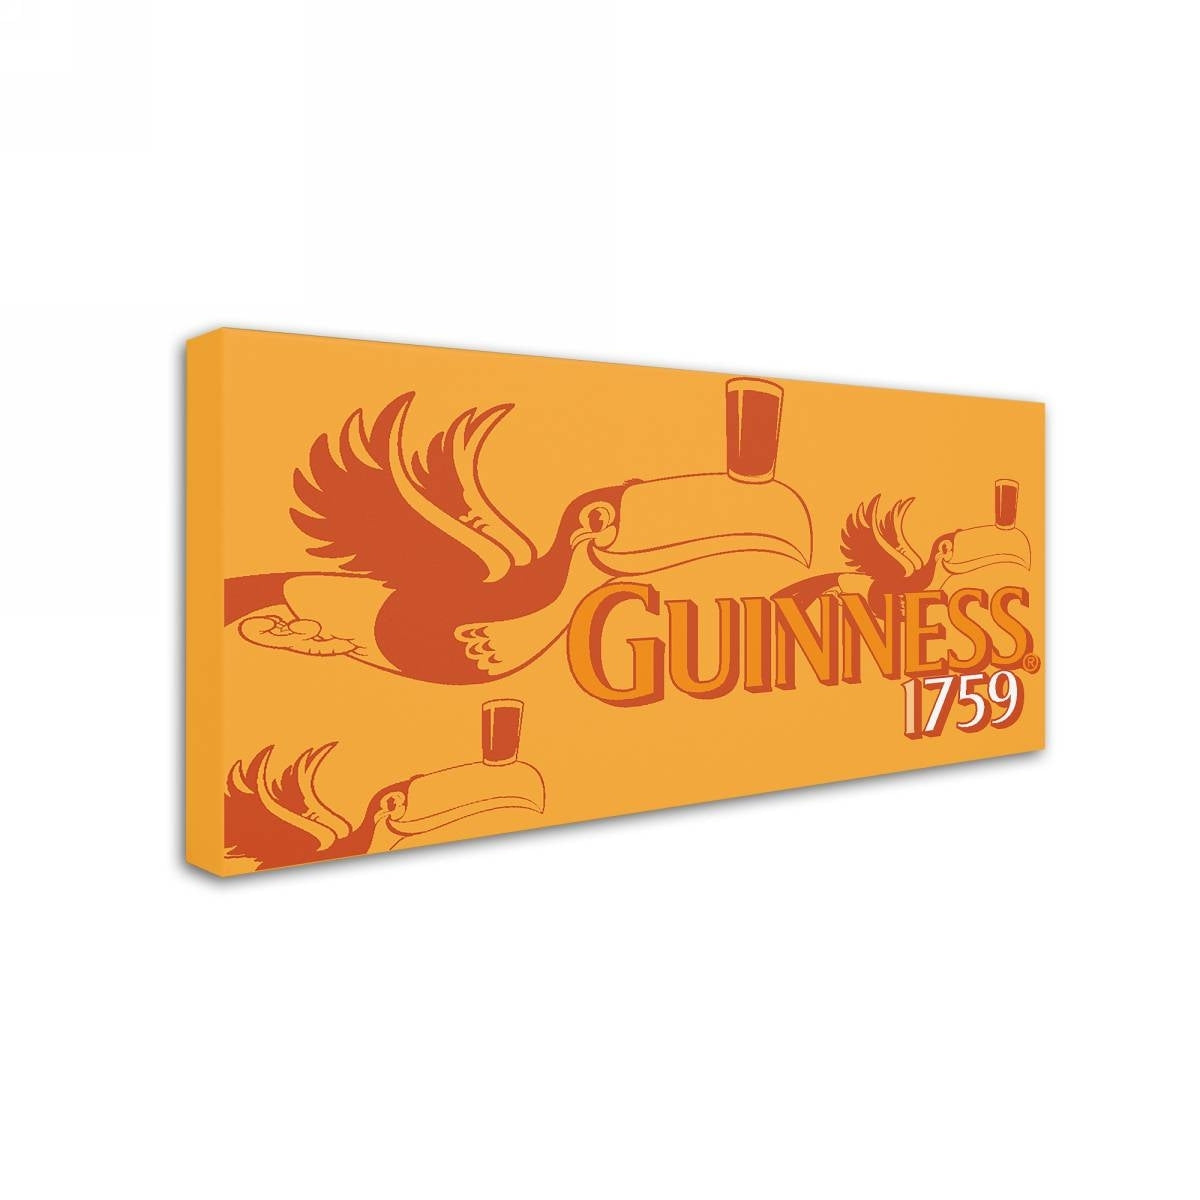 Guinness Brewery 'Guinness 1759' canvas art featuring the iconic 1759 logo.